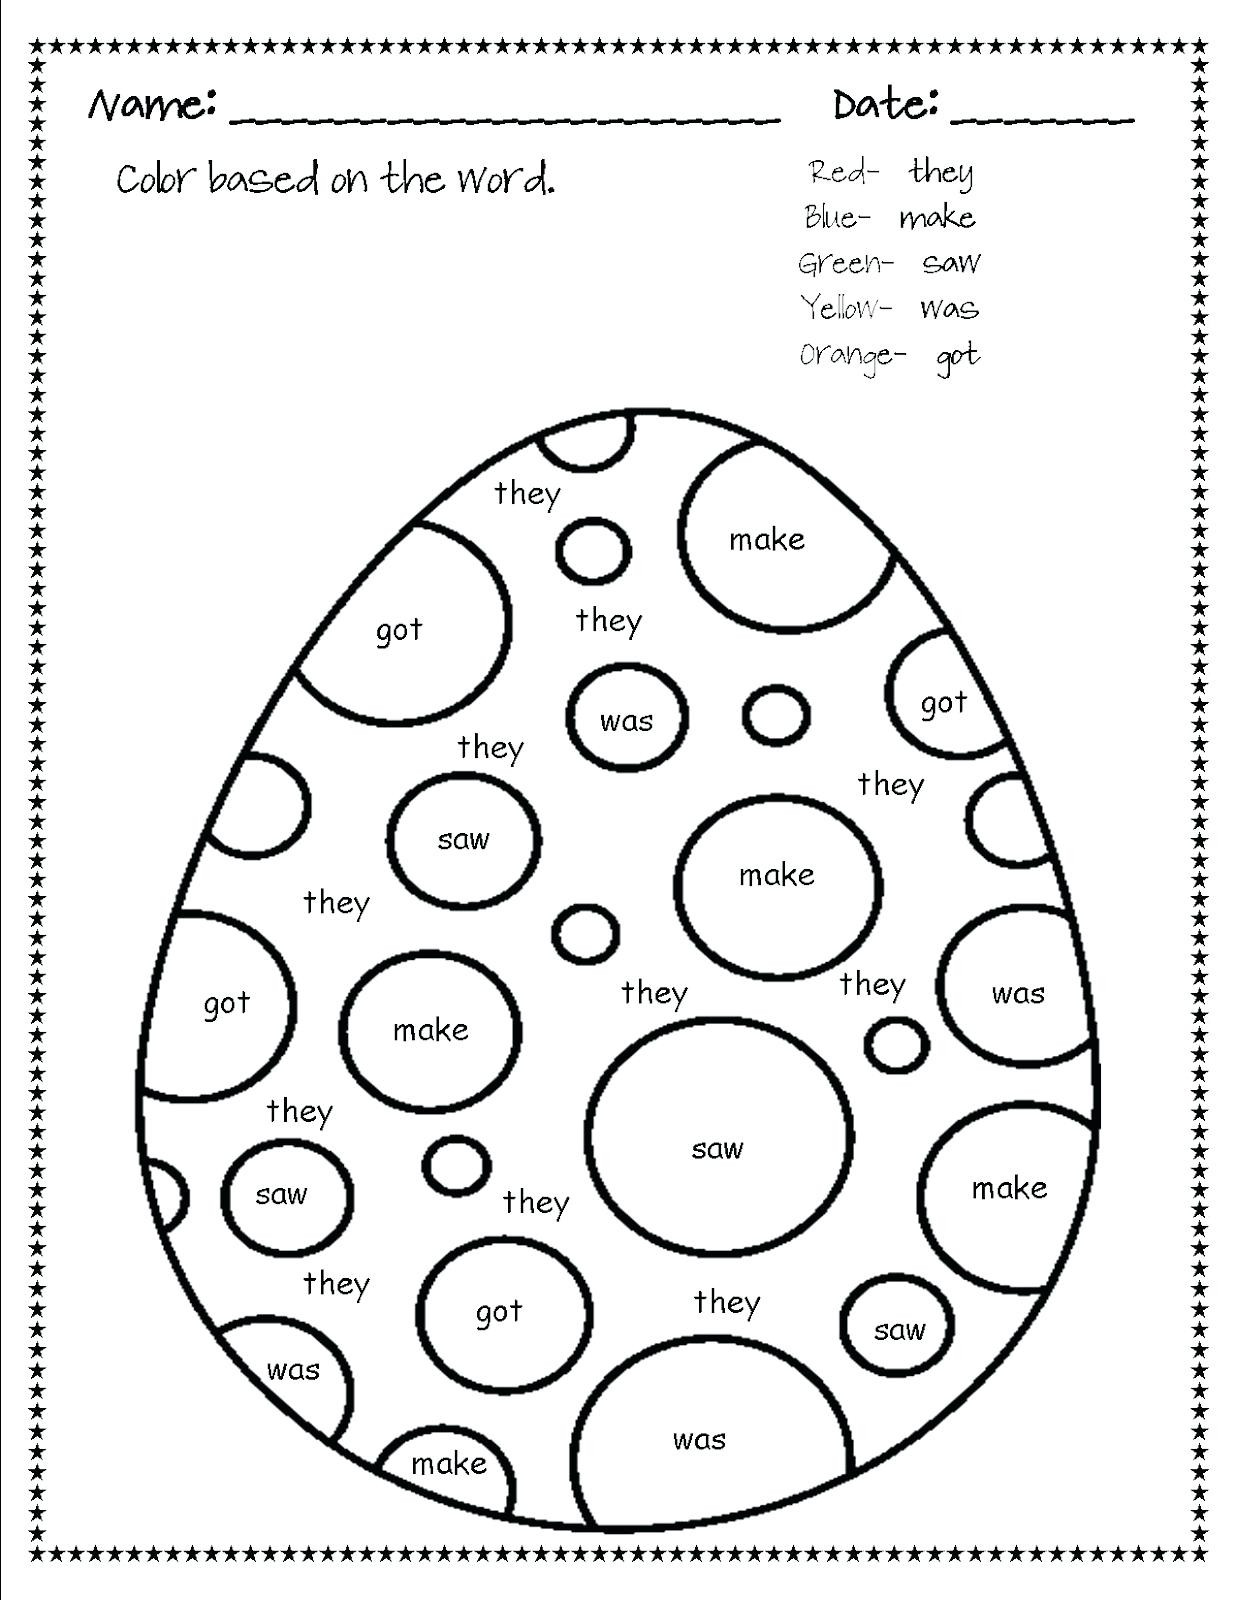 Free Math Worksheets First Grade 1 Subtraction Subtracting 1 Digit From 2 Digit Missing Number